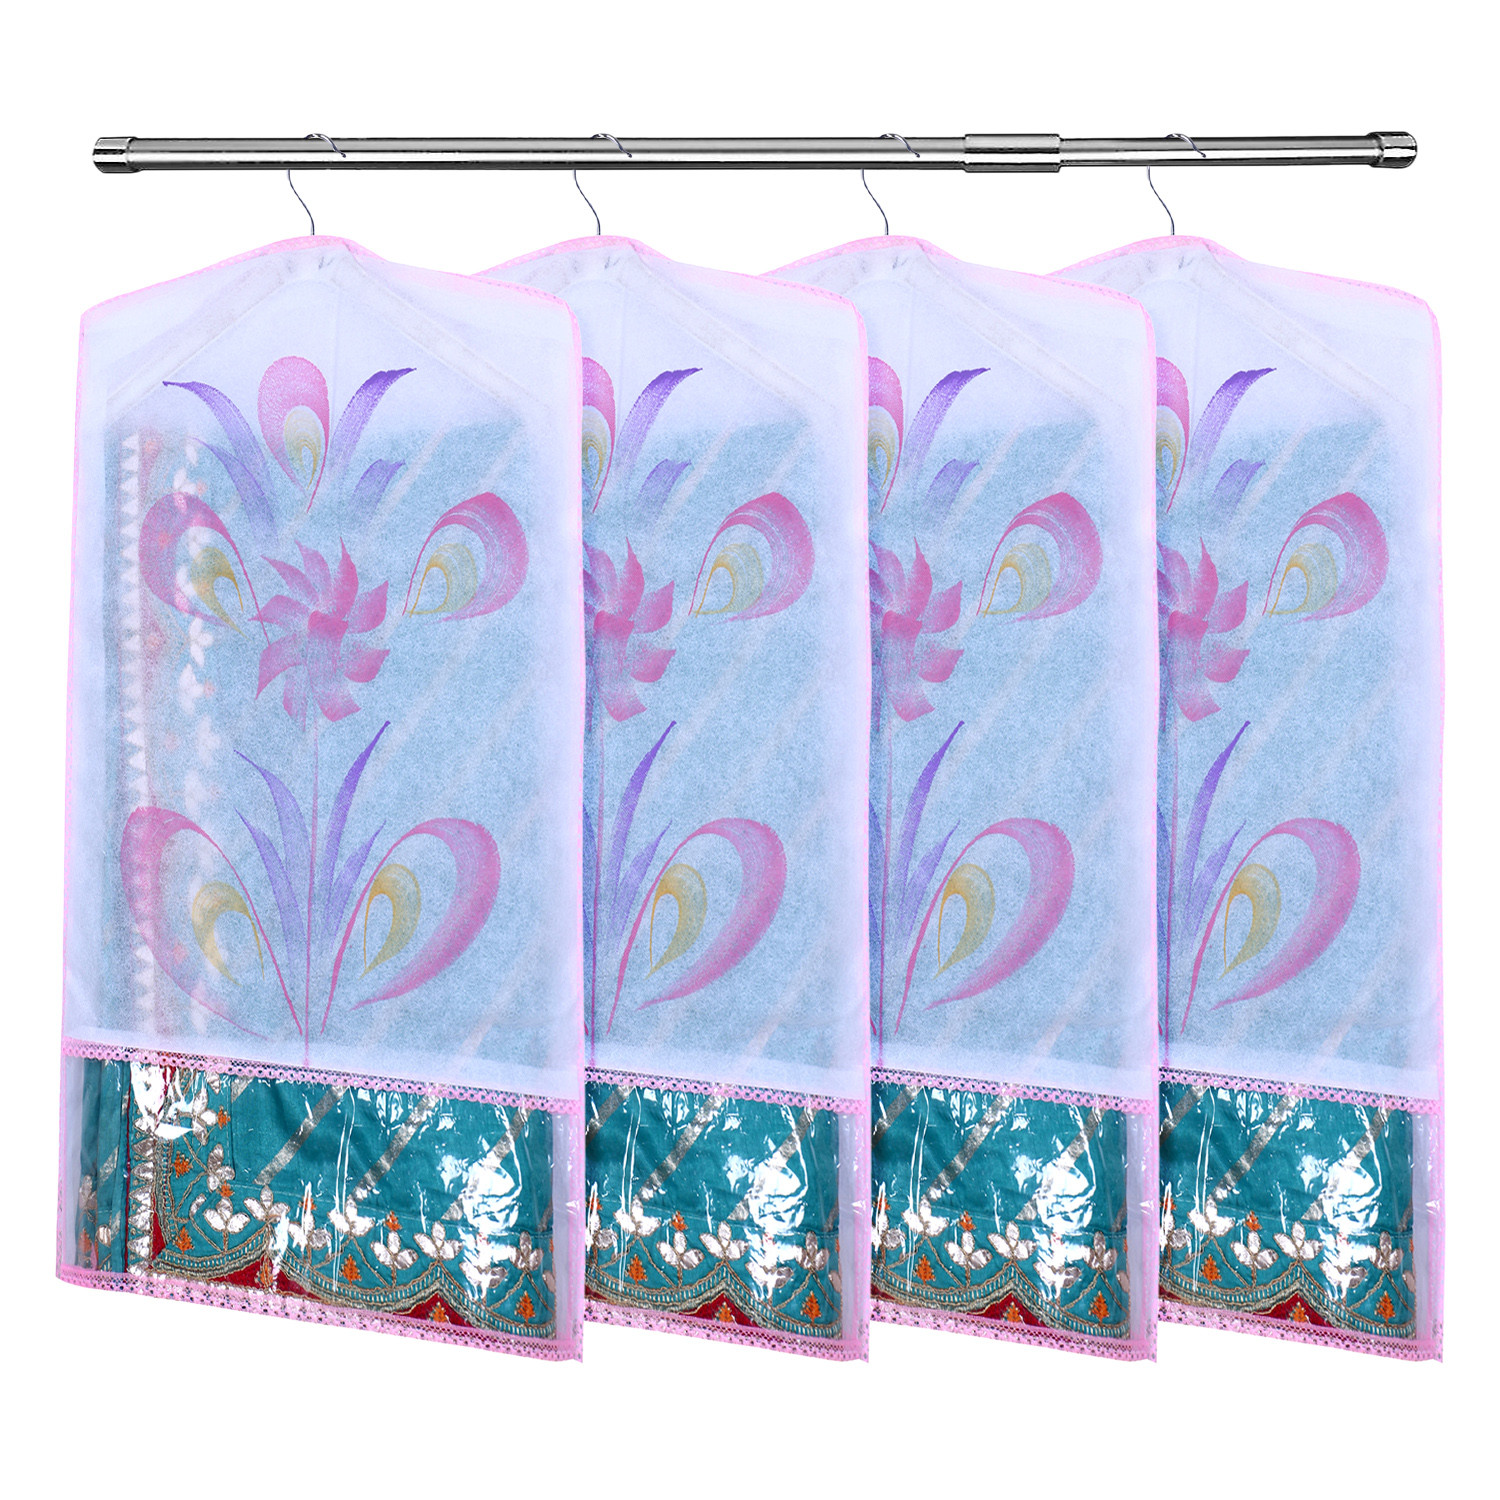 Kuber Industries Hanging Saree Cover | Brush Painting Pattern Saree Cover | Non-Woven Saree Covers for Home | Saree Cover with Small Transparent view |  Pink